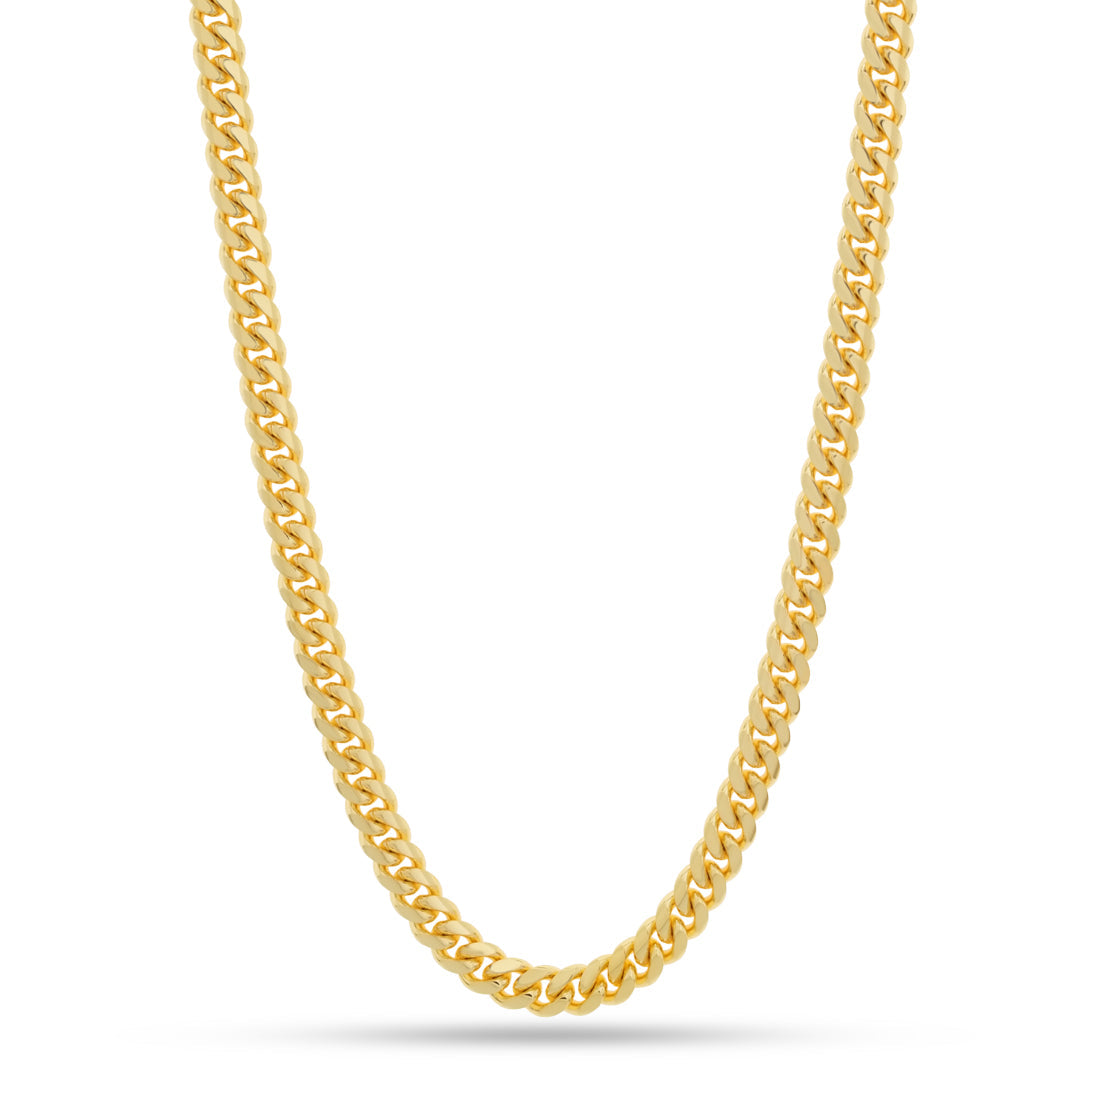 Gold Plated / 14K Gold / 22" 8mm Miami Cuban Link Chain